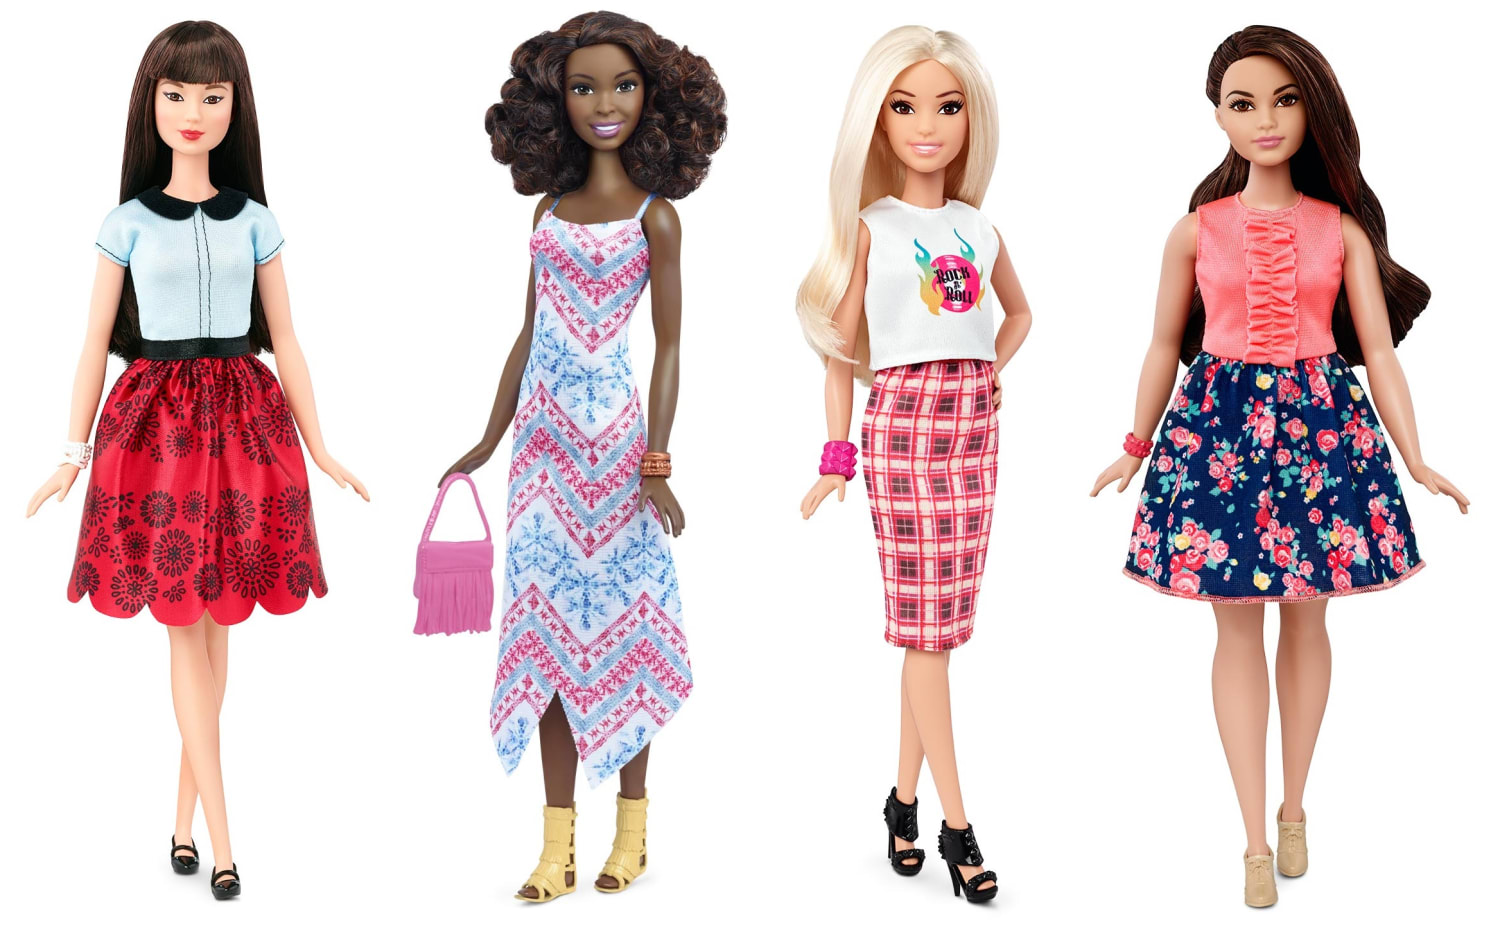 TheDollEvolves: Barbie Now Comes In Body Colors